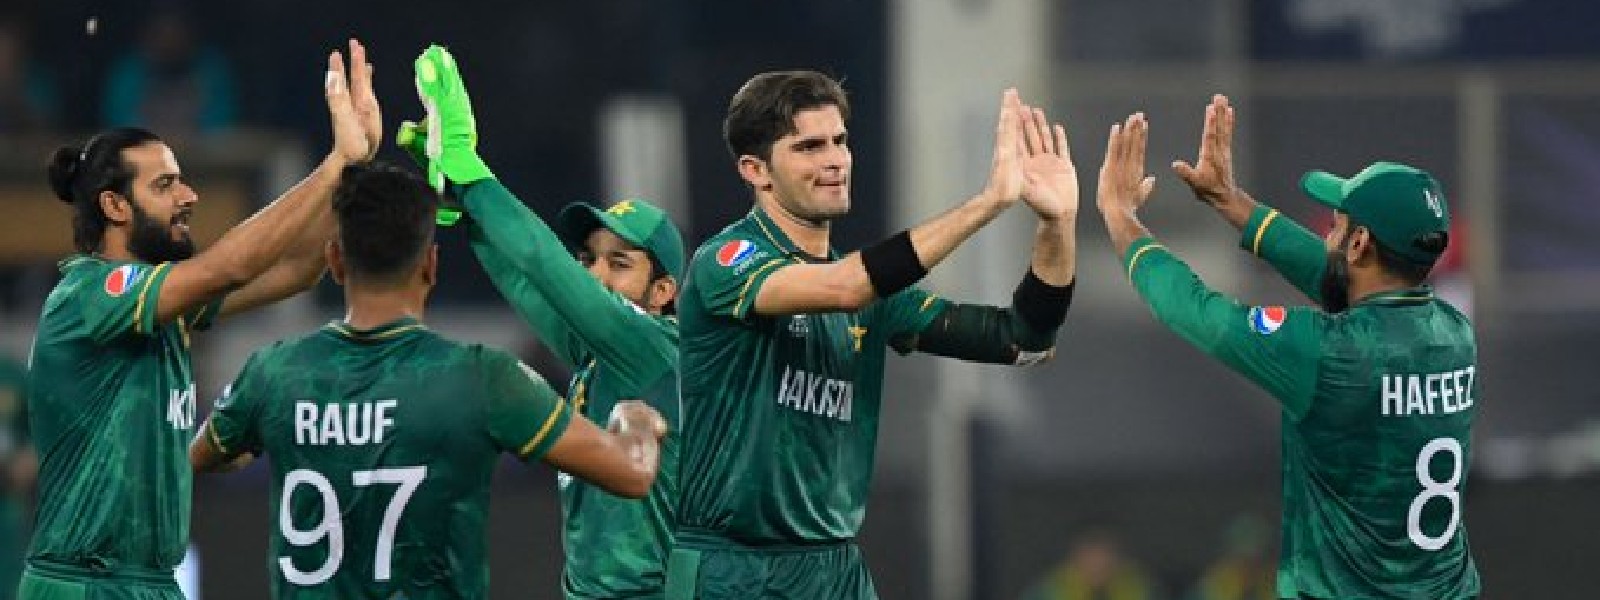 Pakistan record their first-ever win in ICC Men’s T20 World Cup against India